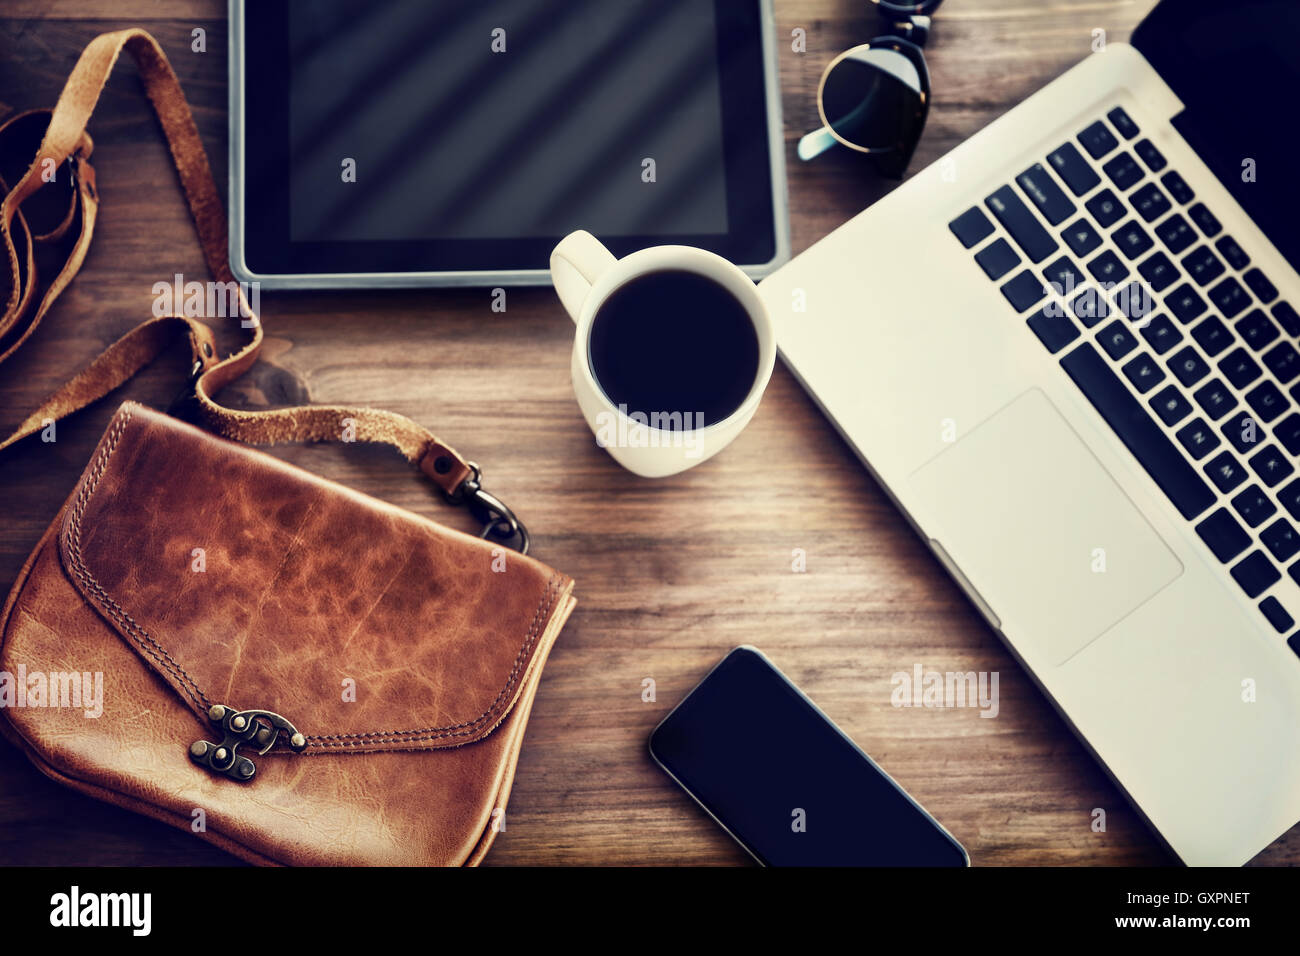 Working place: laptop, tablet, phone, cup of coffee and stylish bag on the table of a business woman, lifestyle of modern people Stock Photo